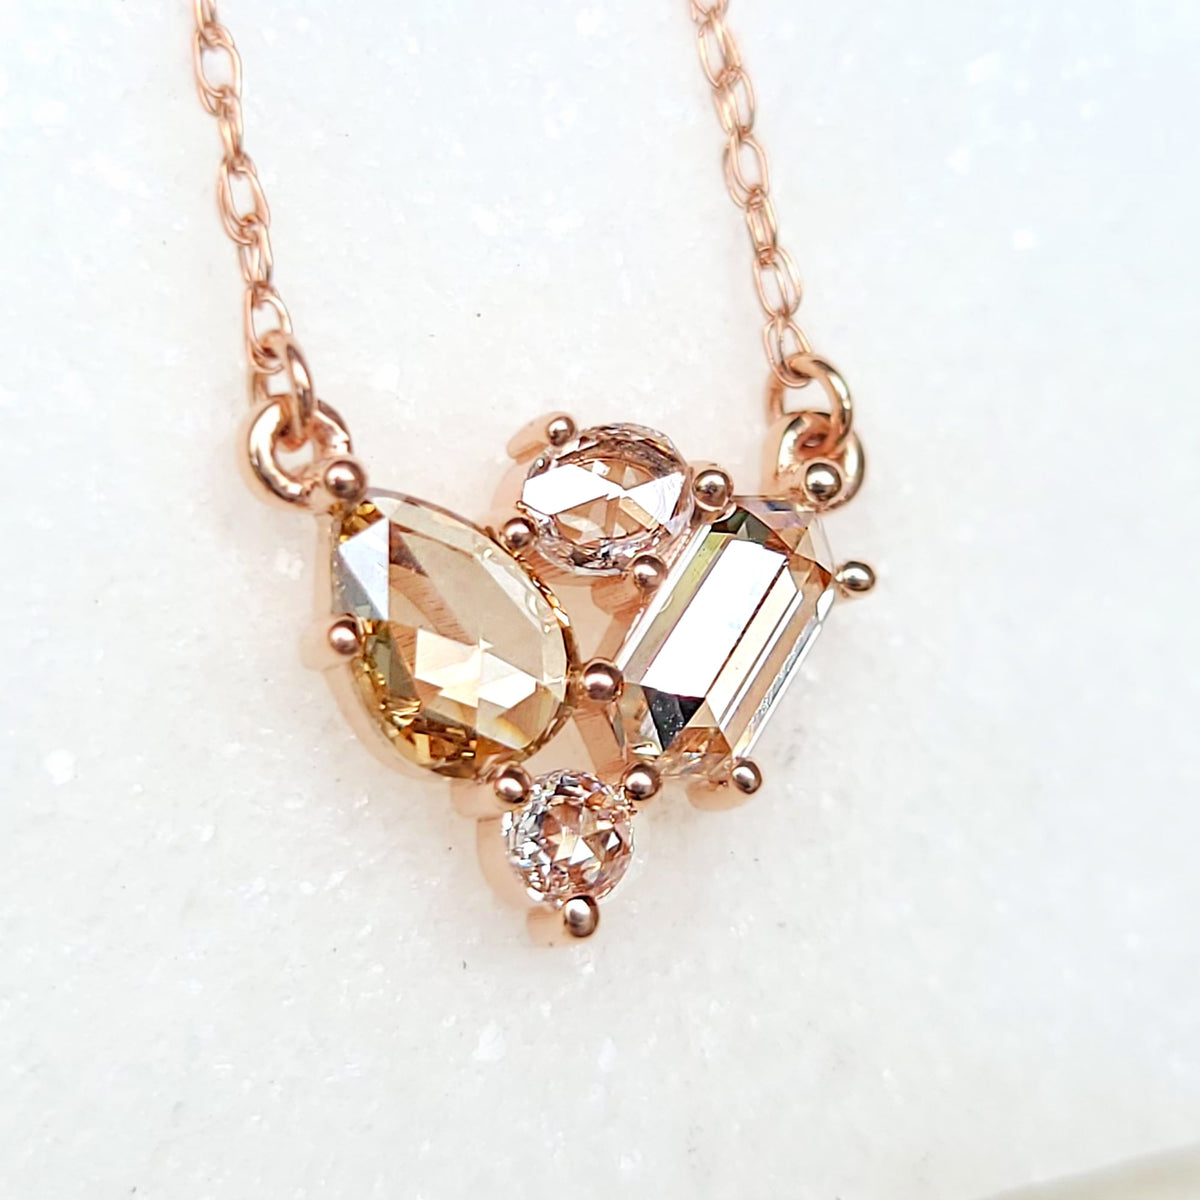 Sincerely Ginger Jewelry 14K Cluster Rose Cut Diamond Necklace